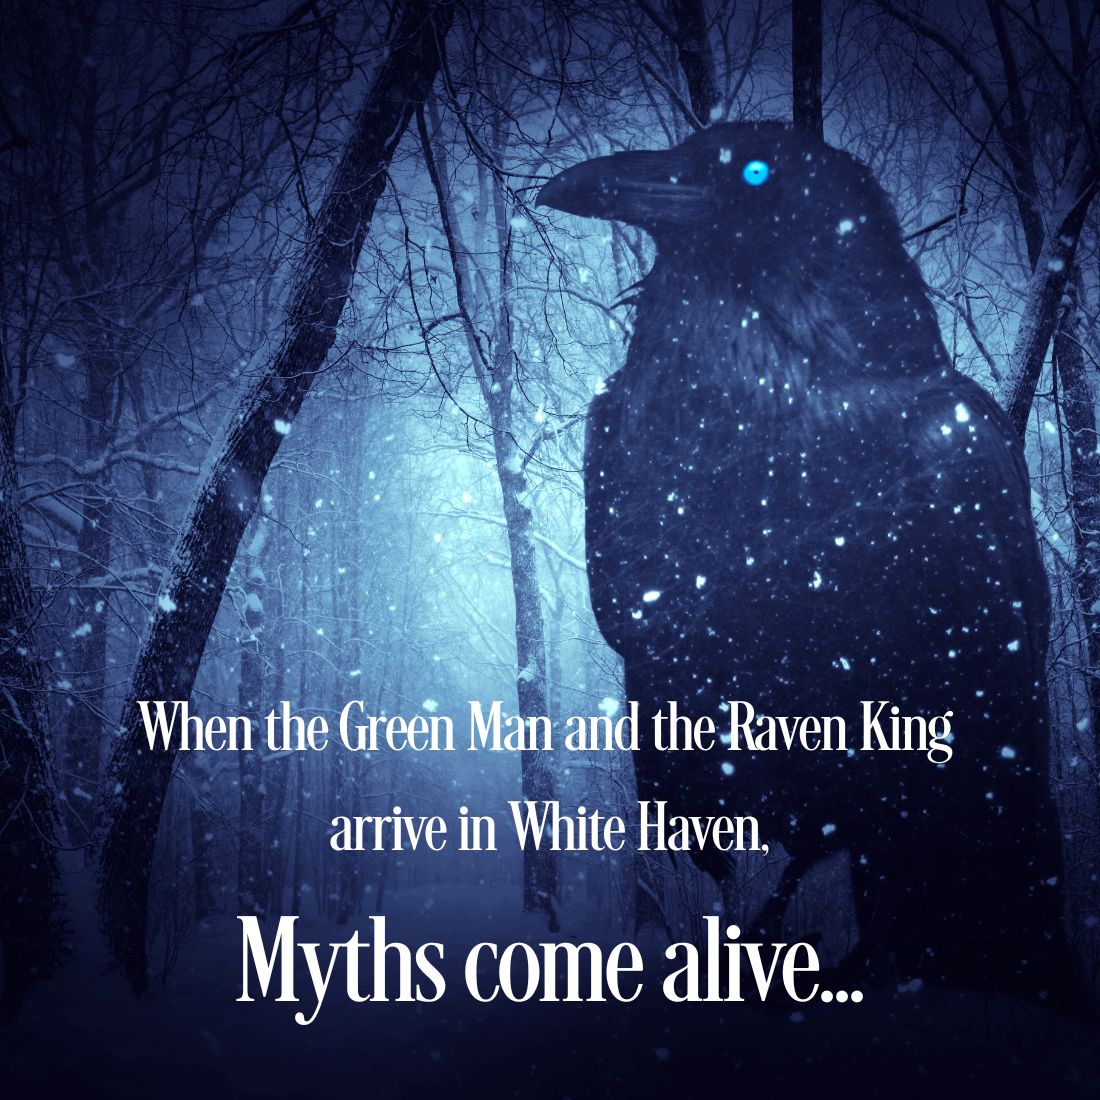 Green Man, Raven King, myths and legends, magic and witchcraft, paranormal mystery and urban fantasy